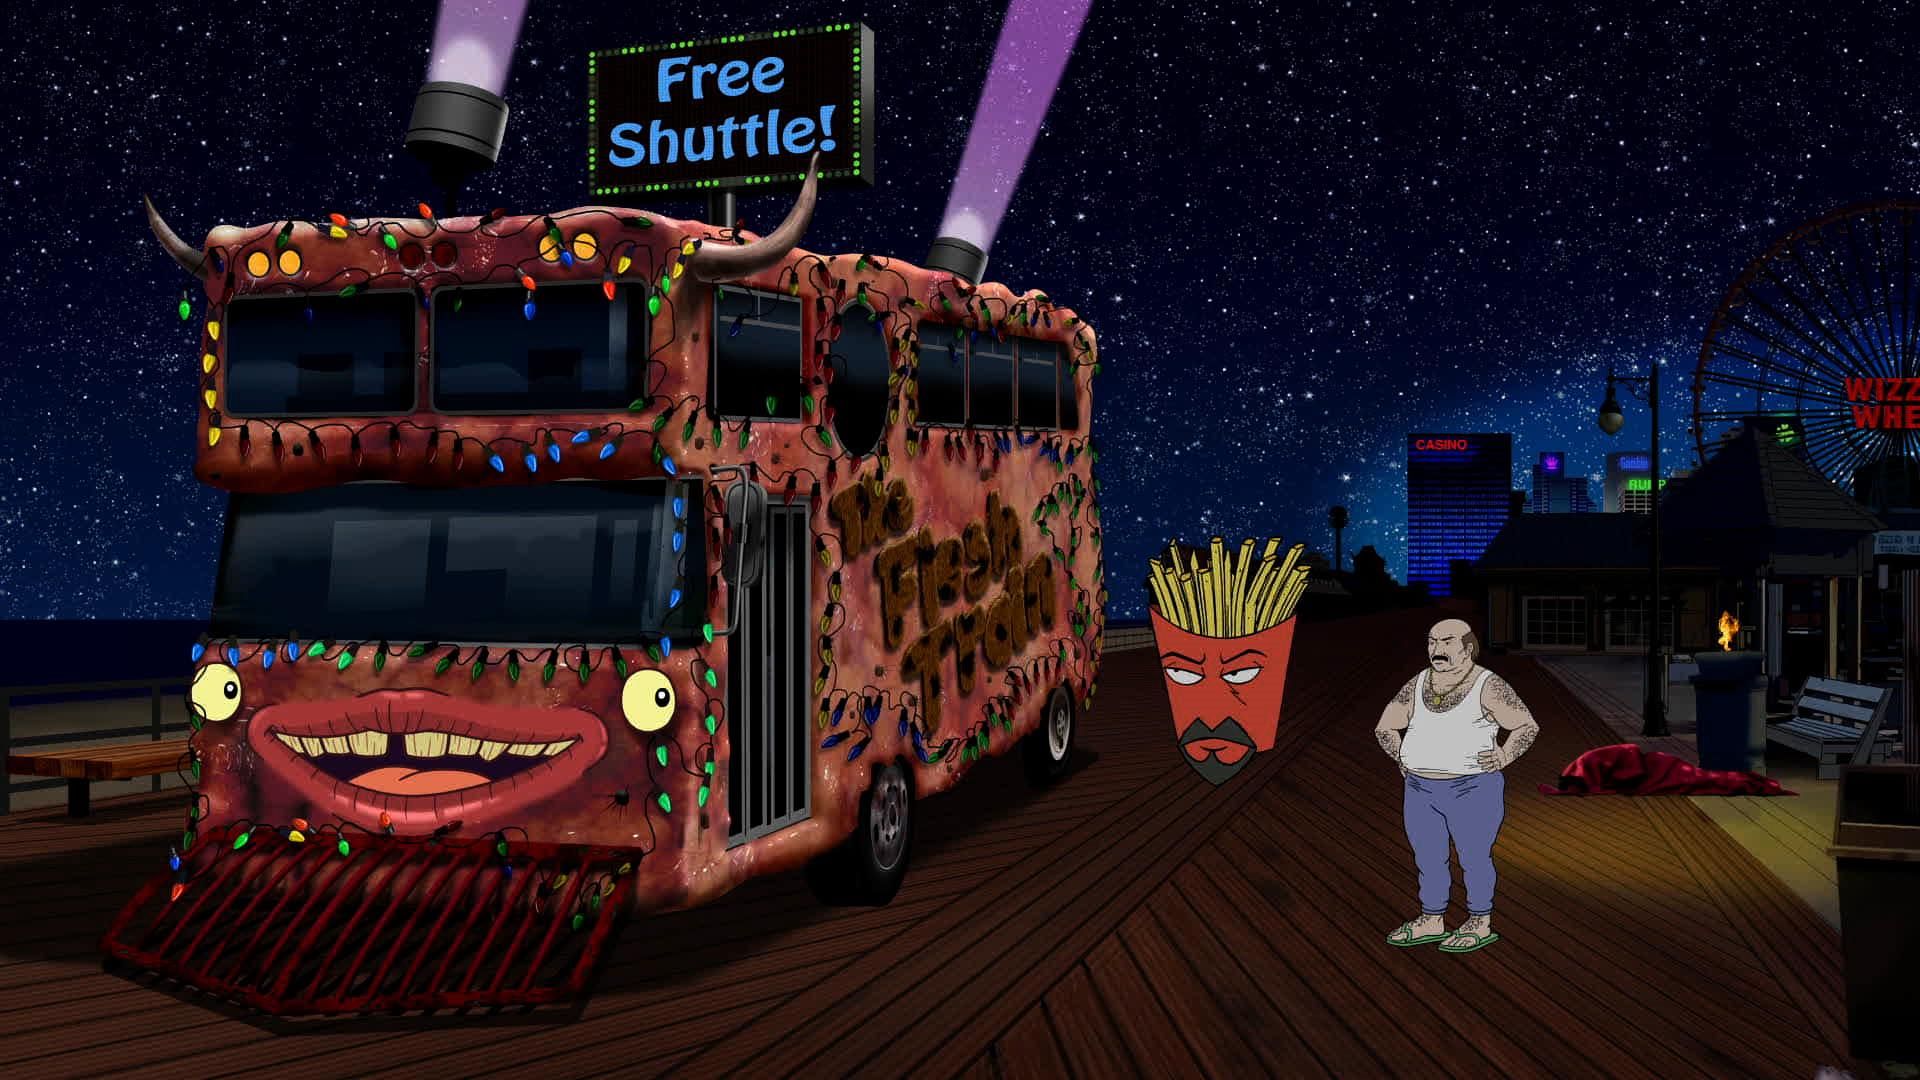 Forced Sex In Bus - The Hairy Bus - S11 EP3 - Aqua Teen Hunger Force